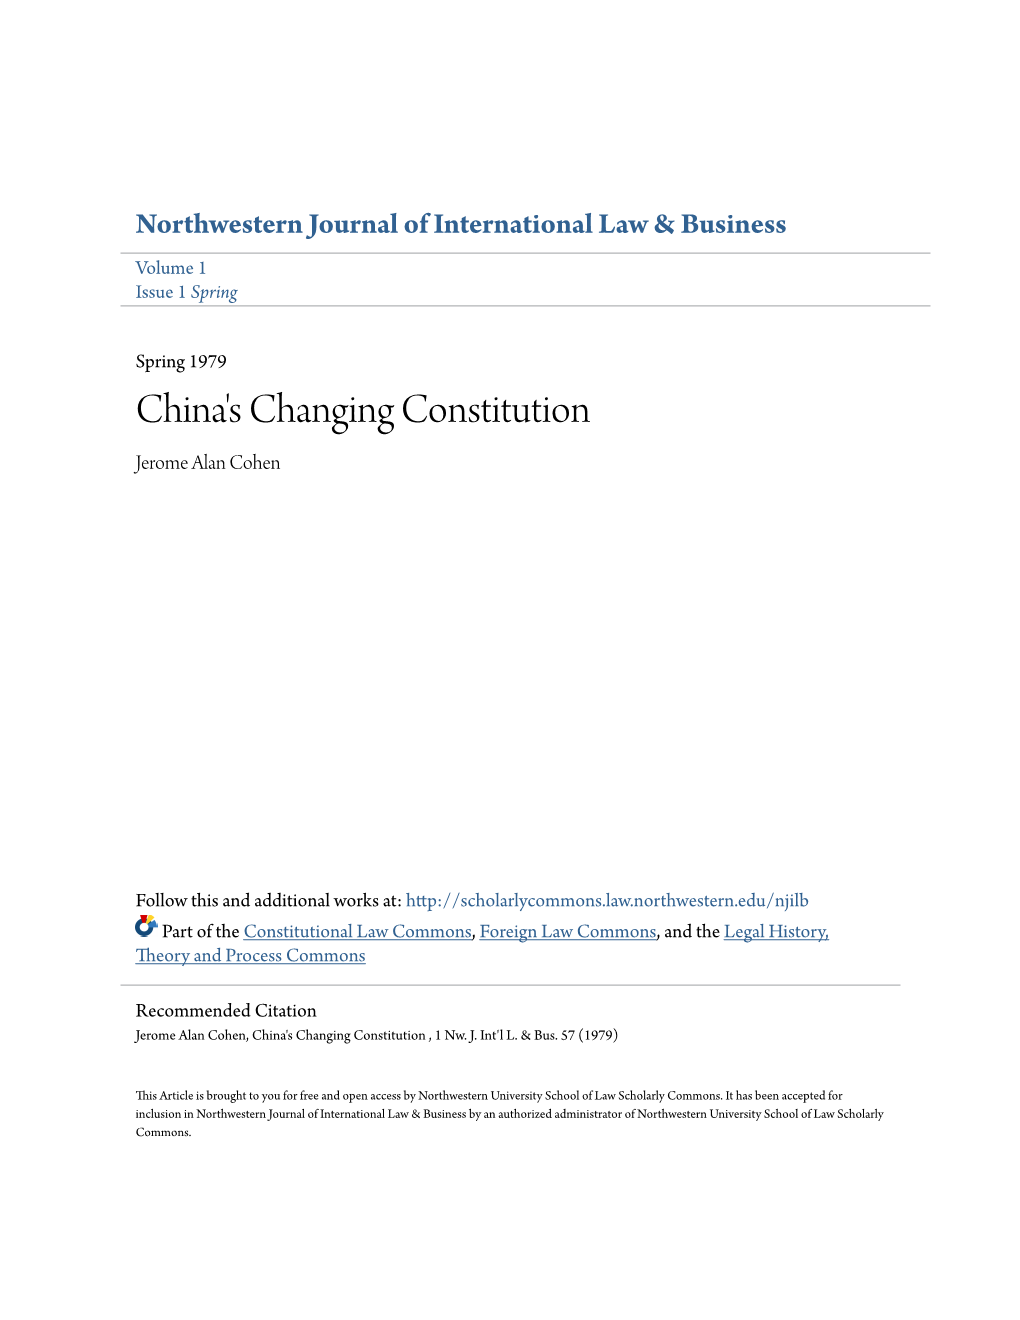 China's Changing Constitution Jerome Alan Cohen